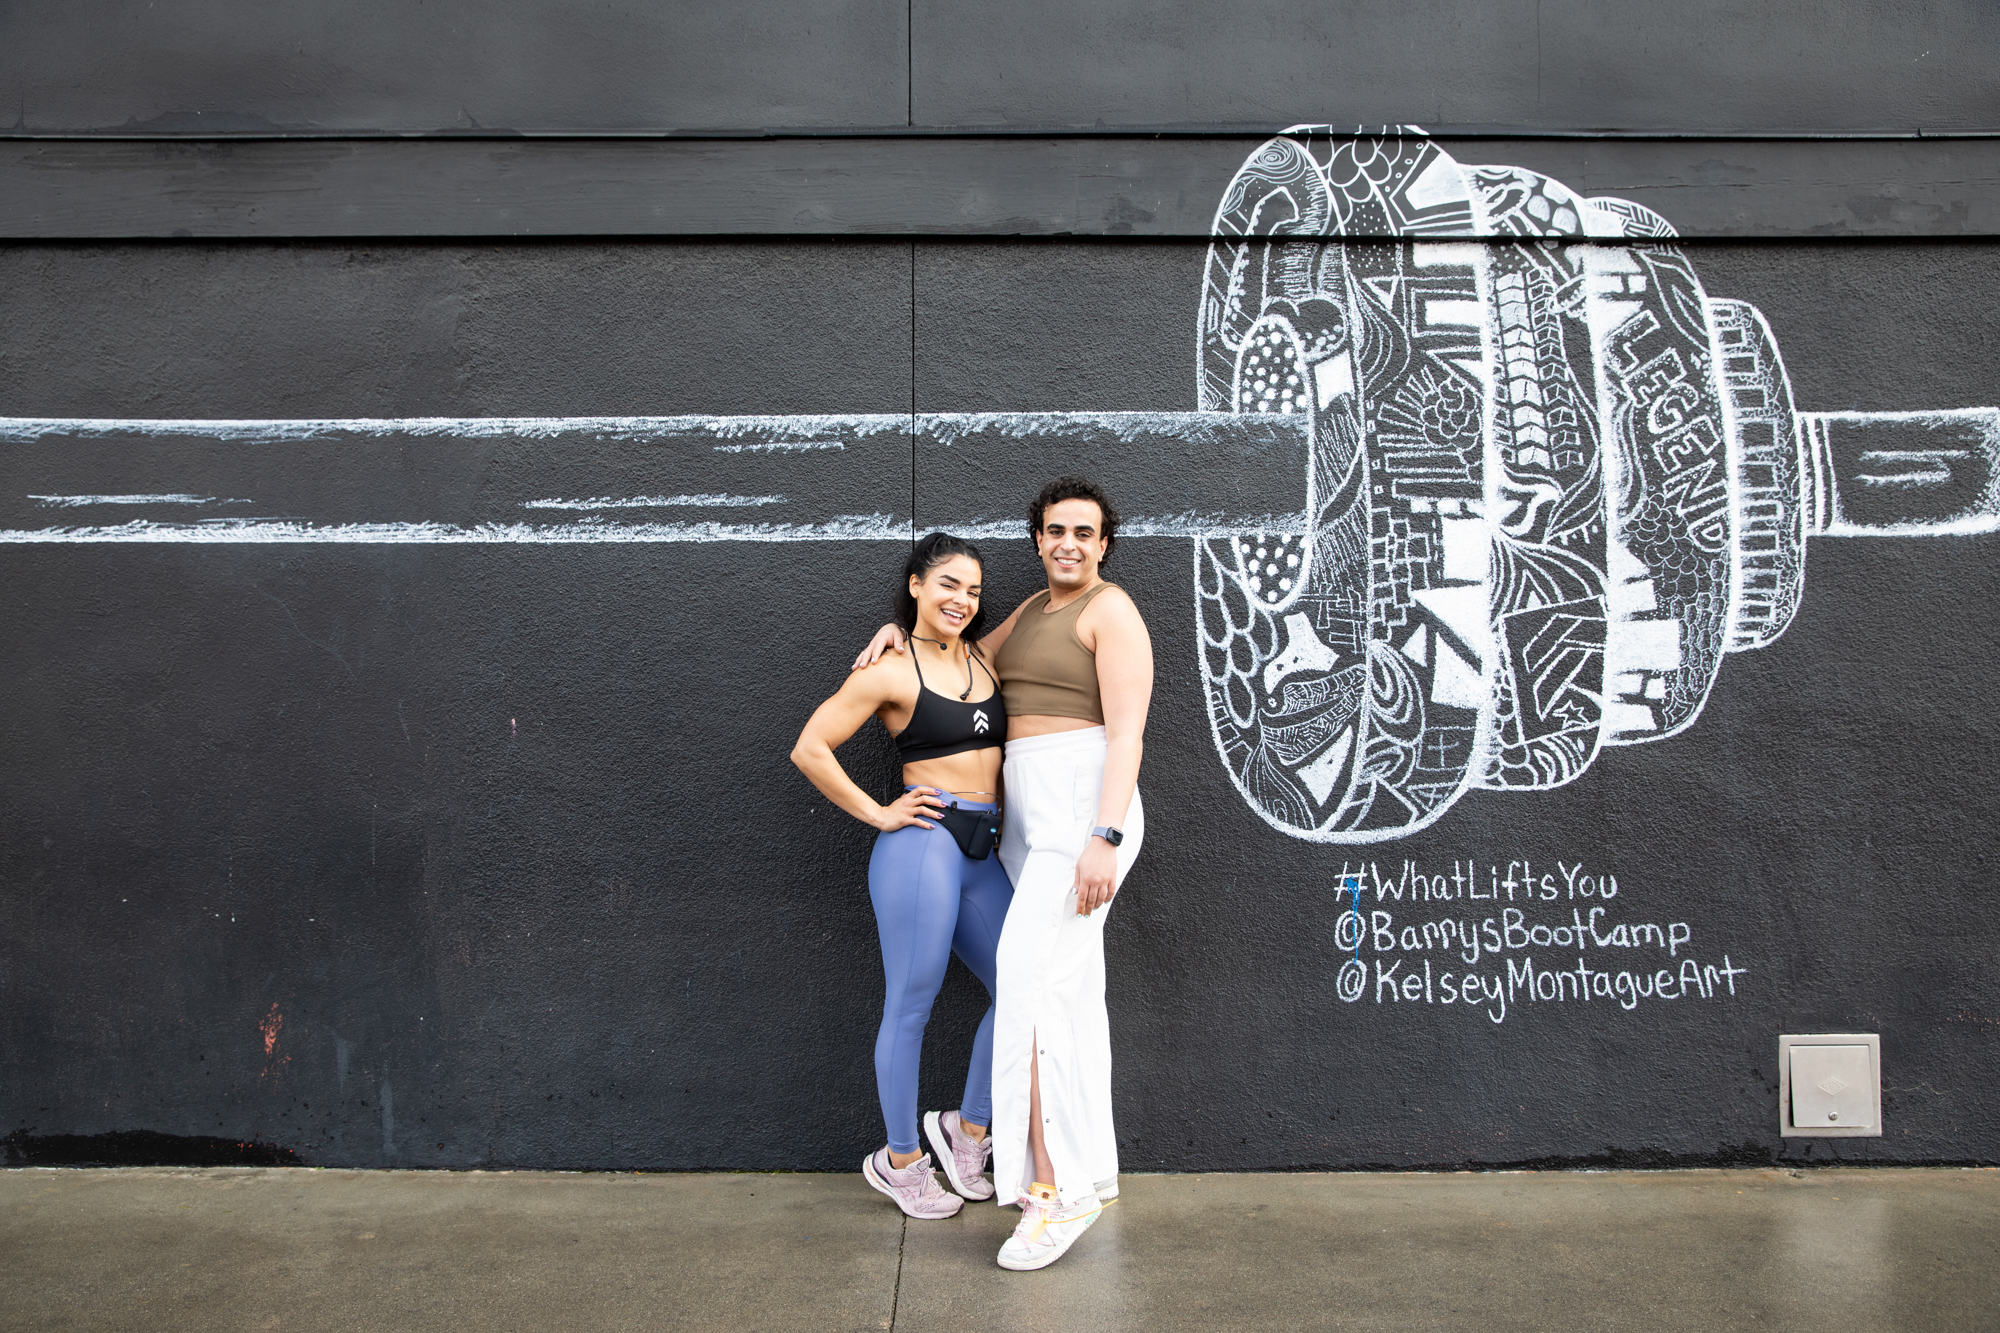 Barry's Bootcamp instructors Venice